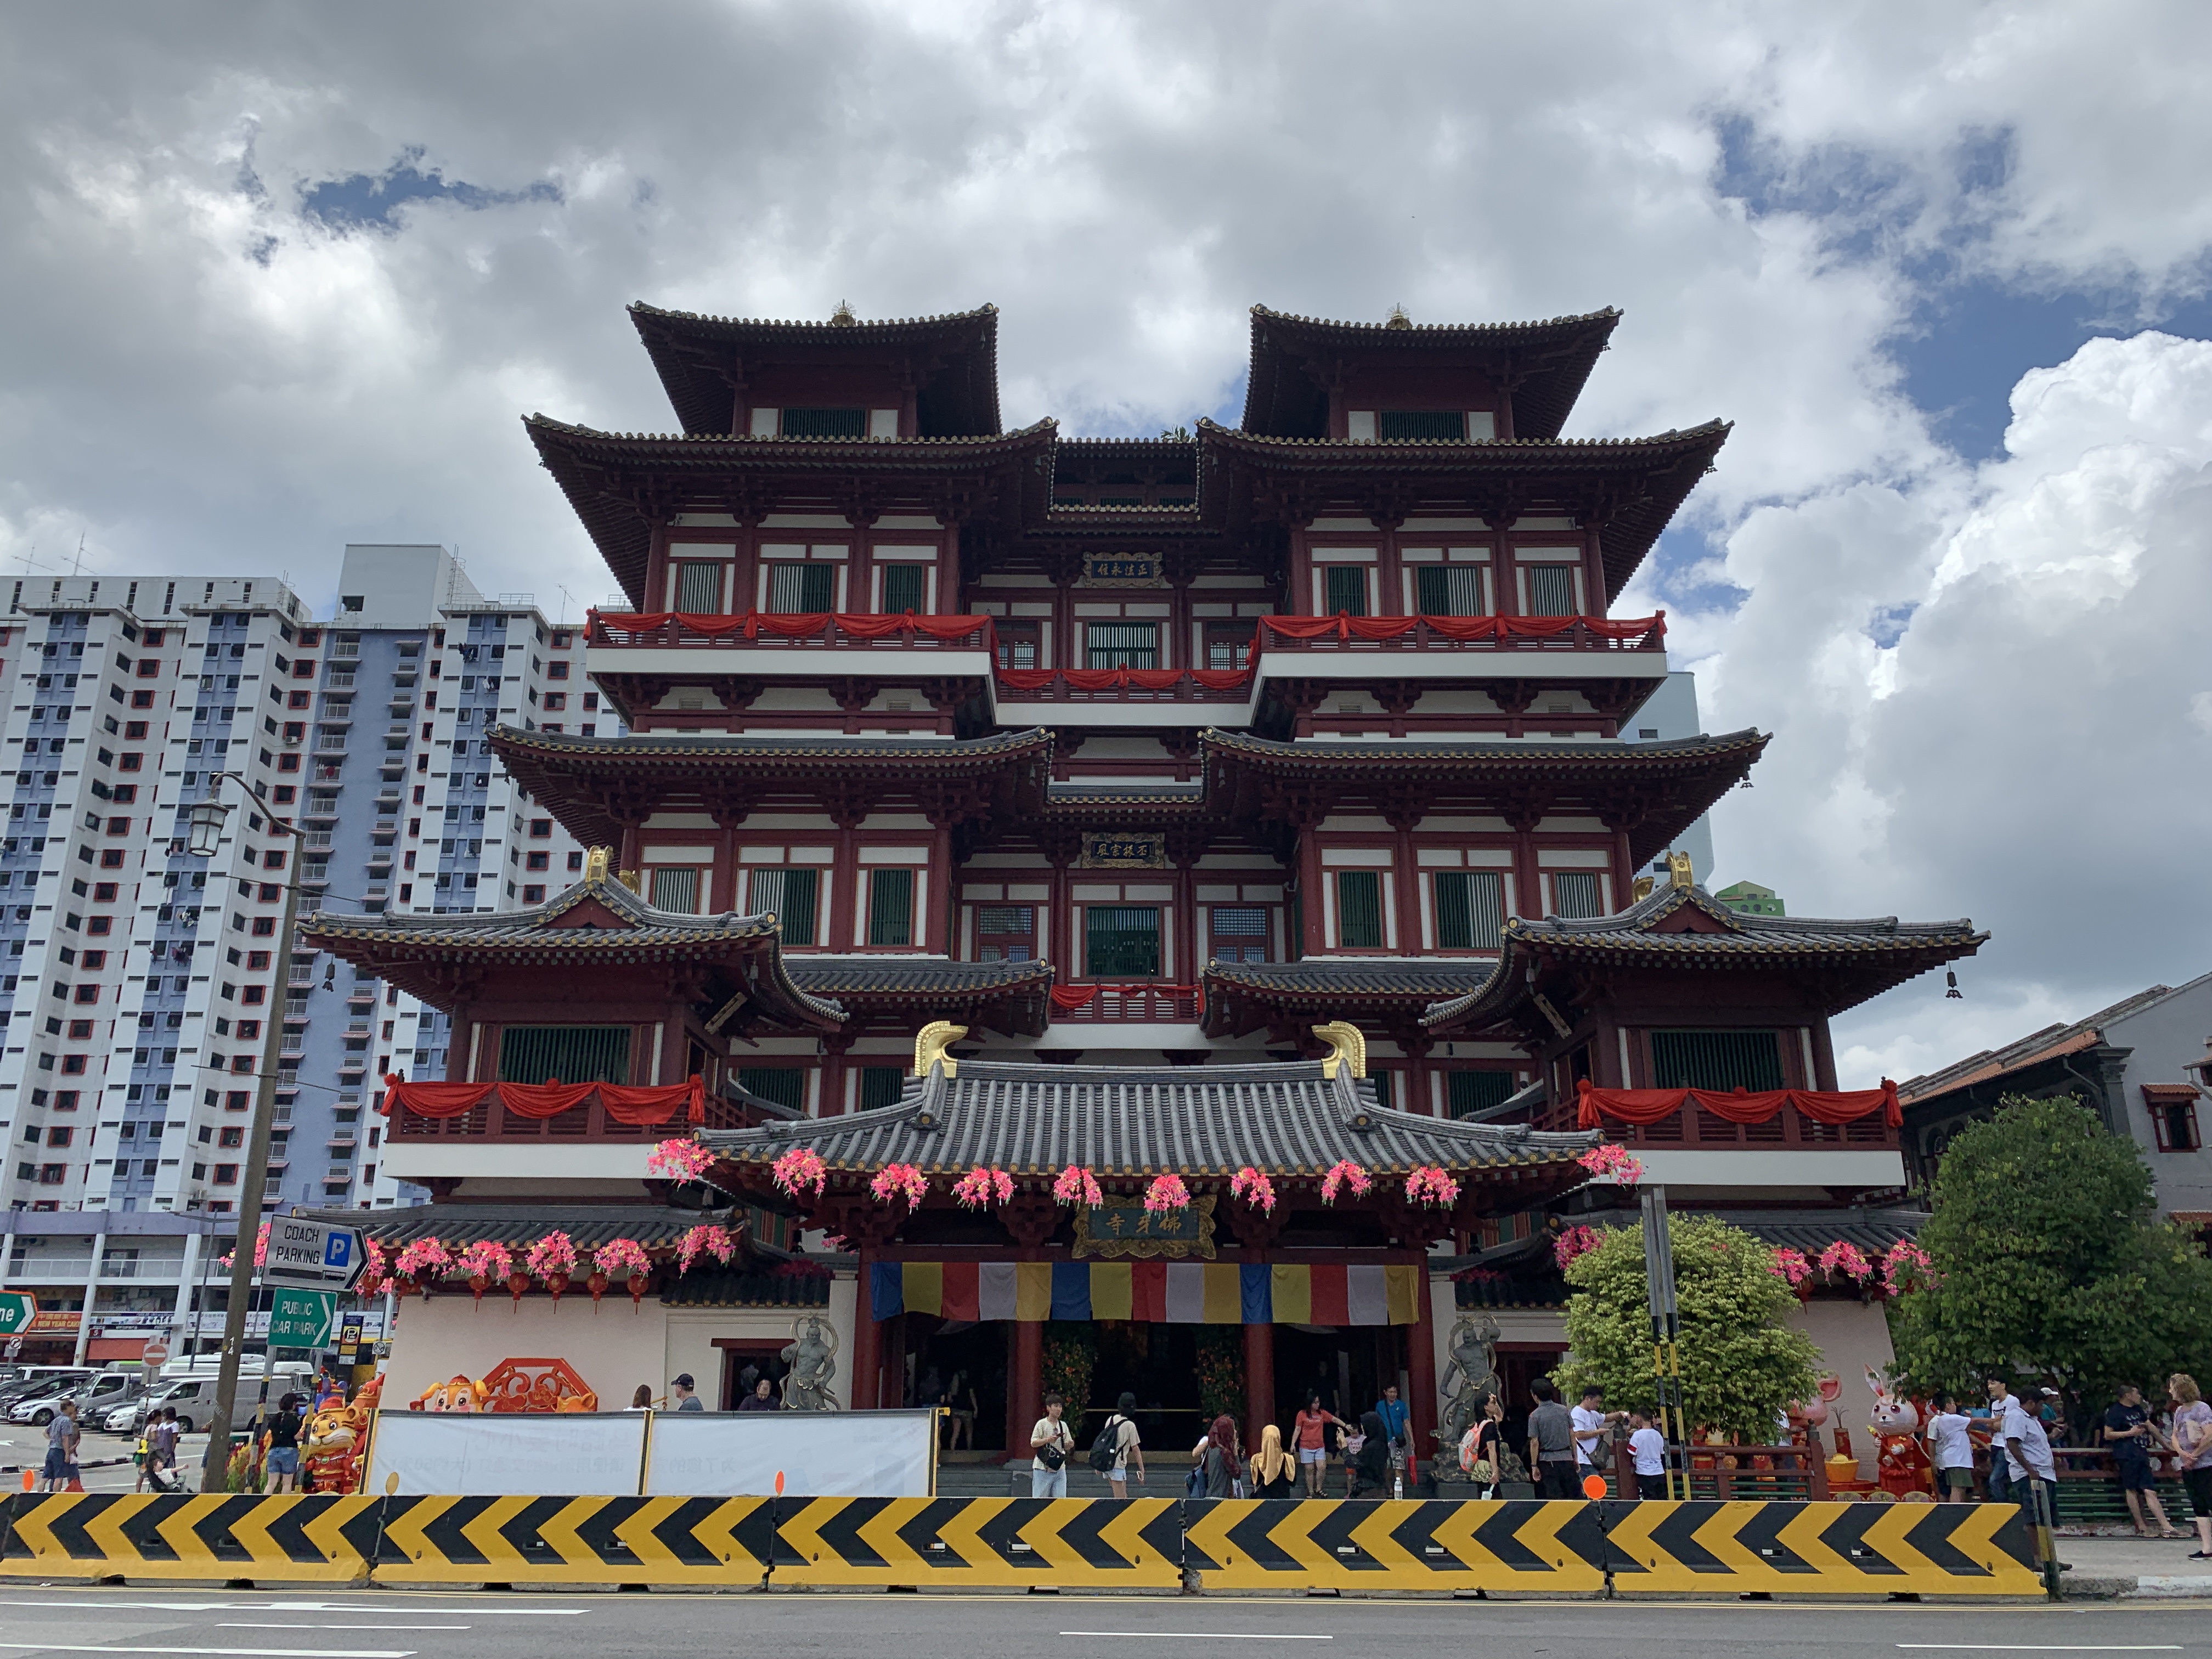 The Buddha Tooth Relic Temple and Museum, located in Singapore's Chinatown